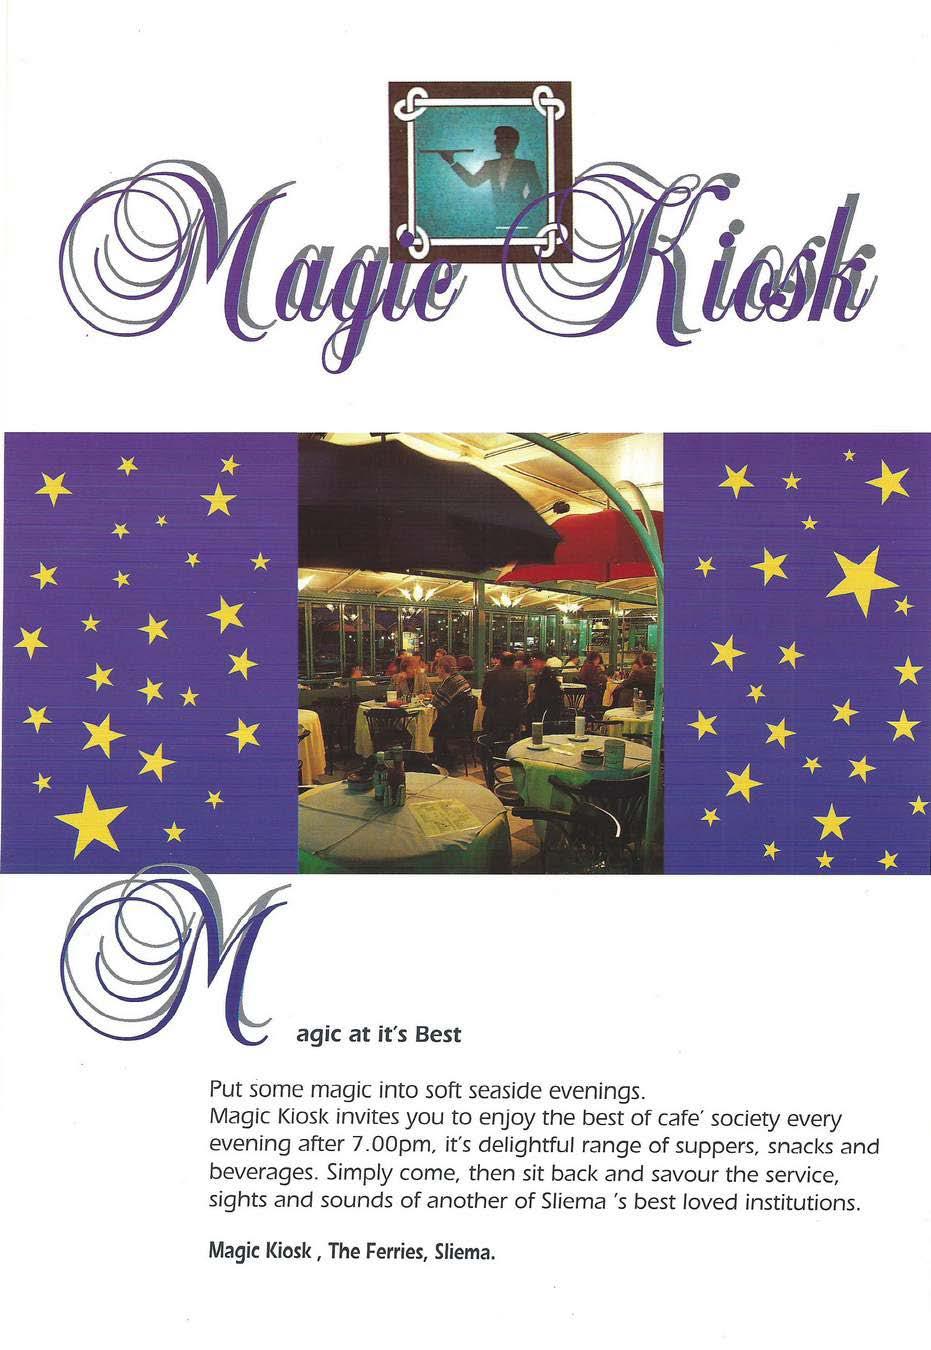 agic at it's Best Put some magic into soft seaside evenings. Magic Kiosl< invites you to enjoy the best of cafe' society every evening after 7.